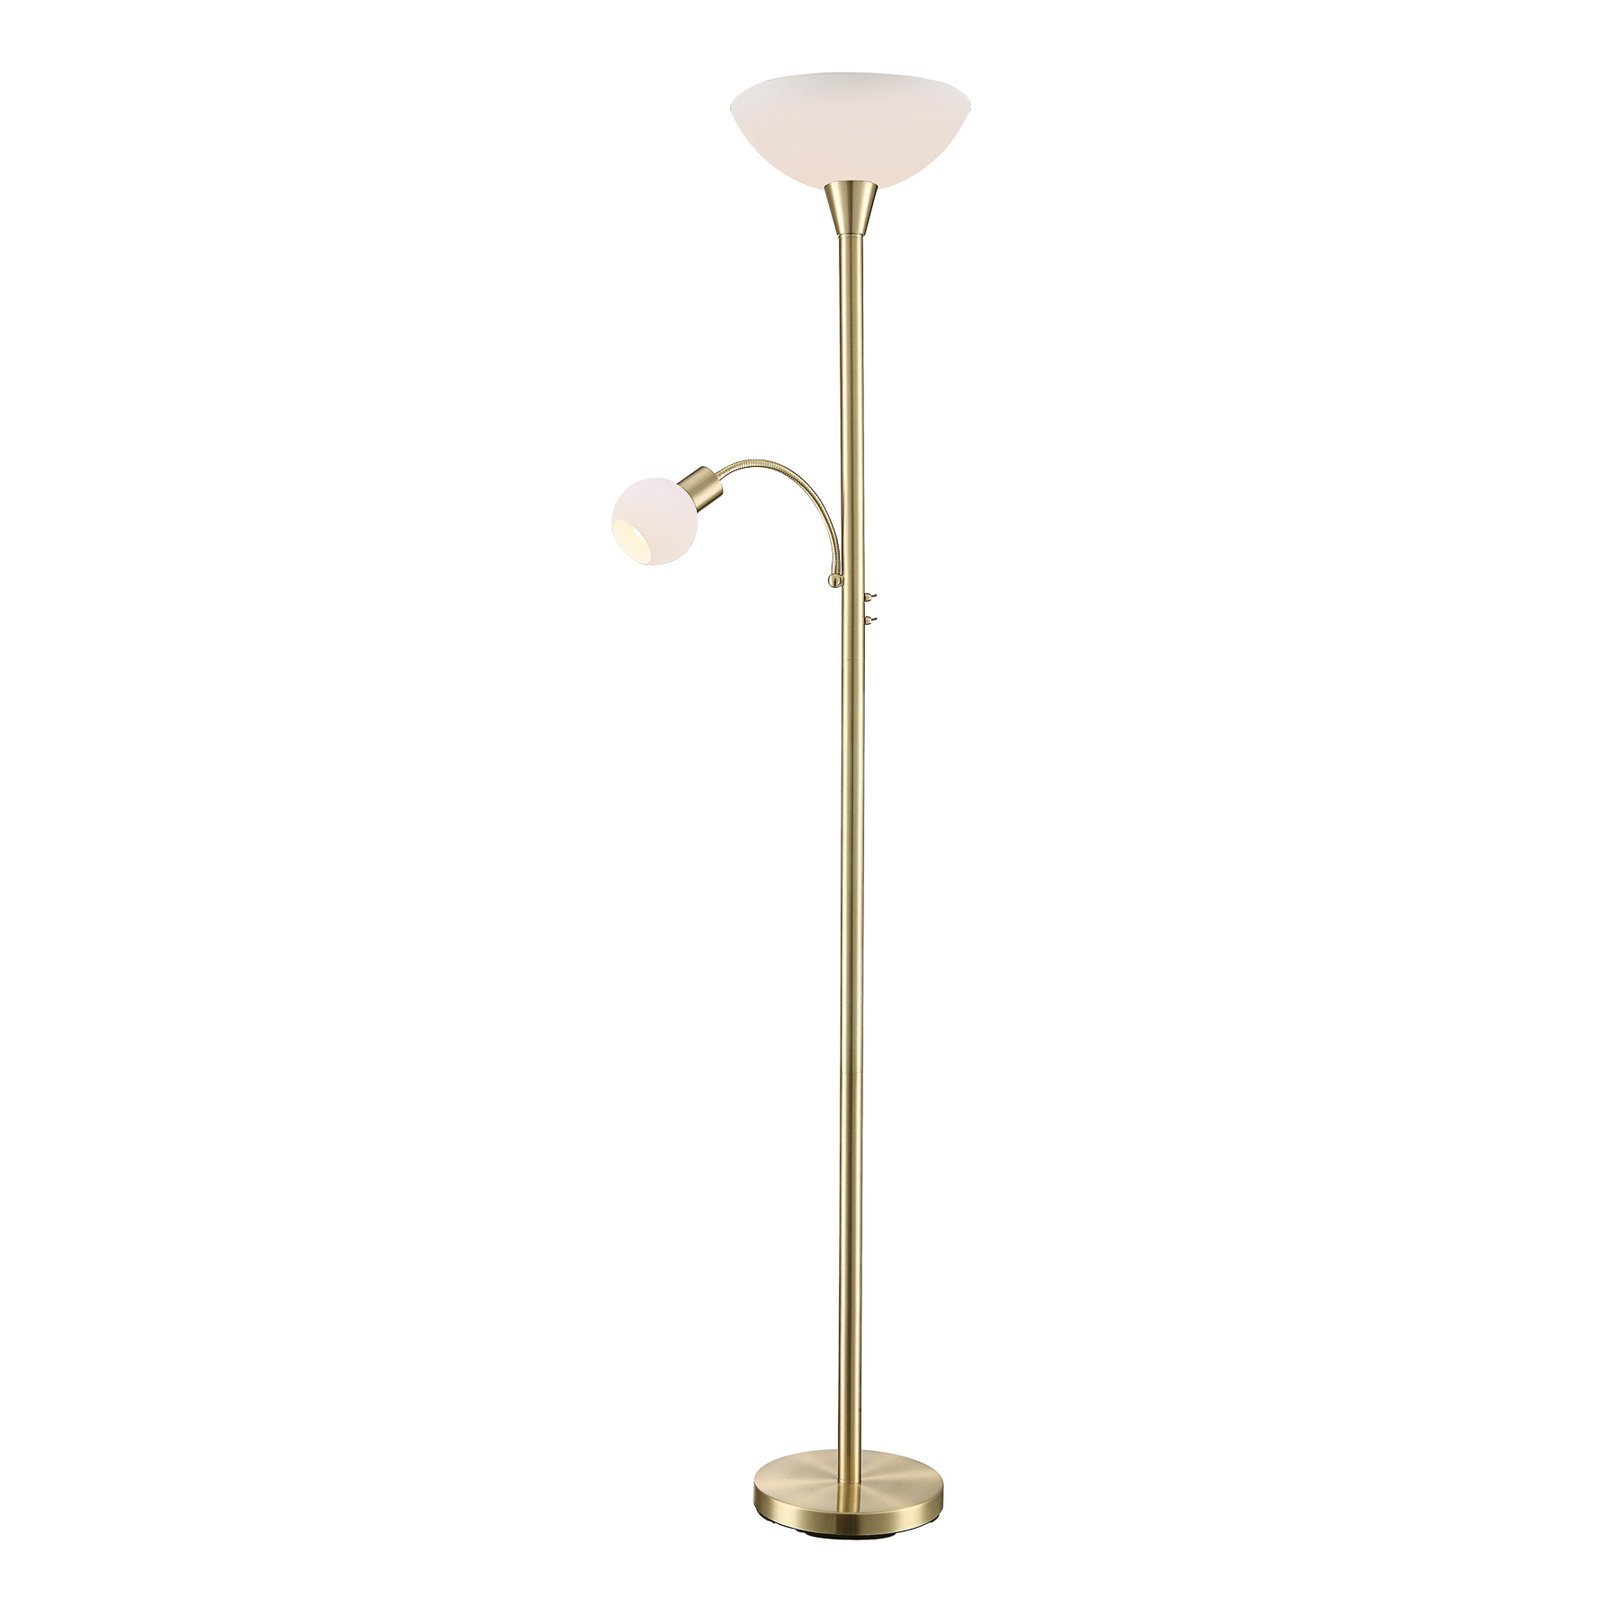 Elaina uplighter with a reading light, brass